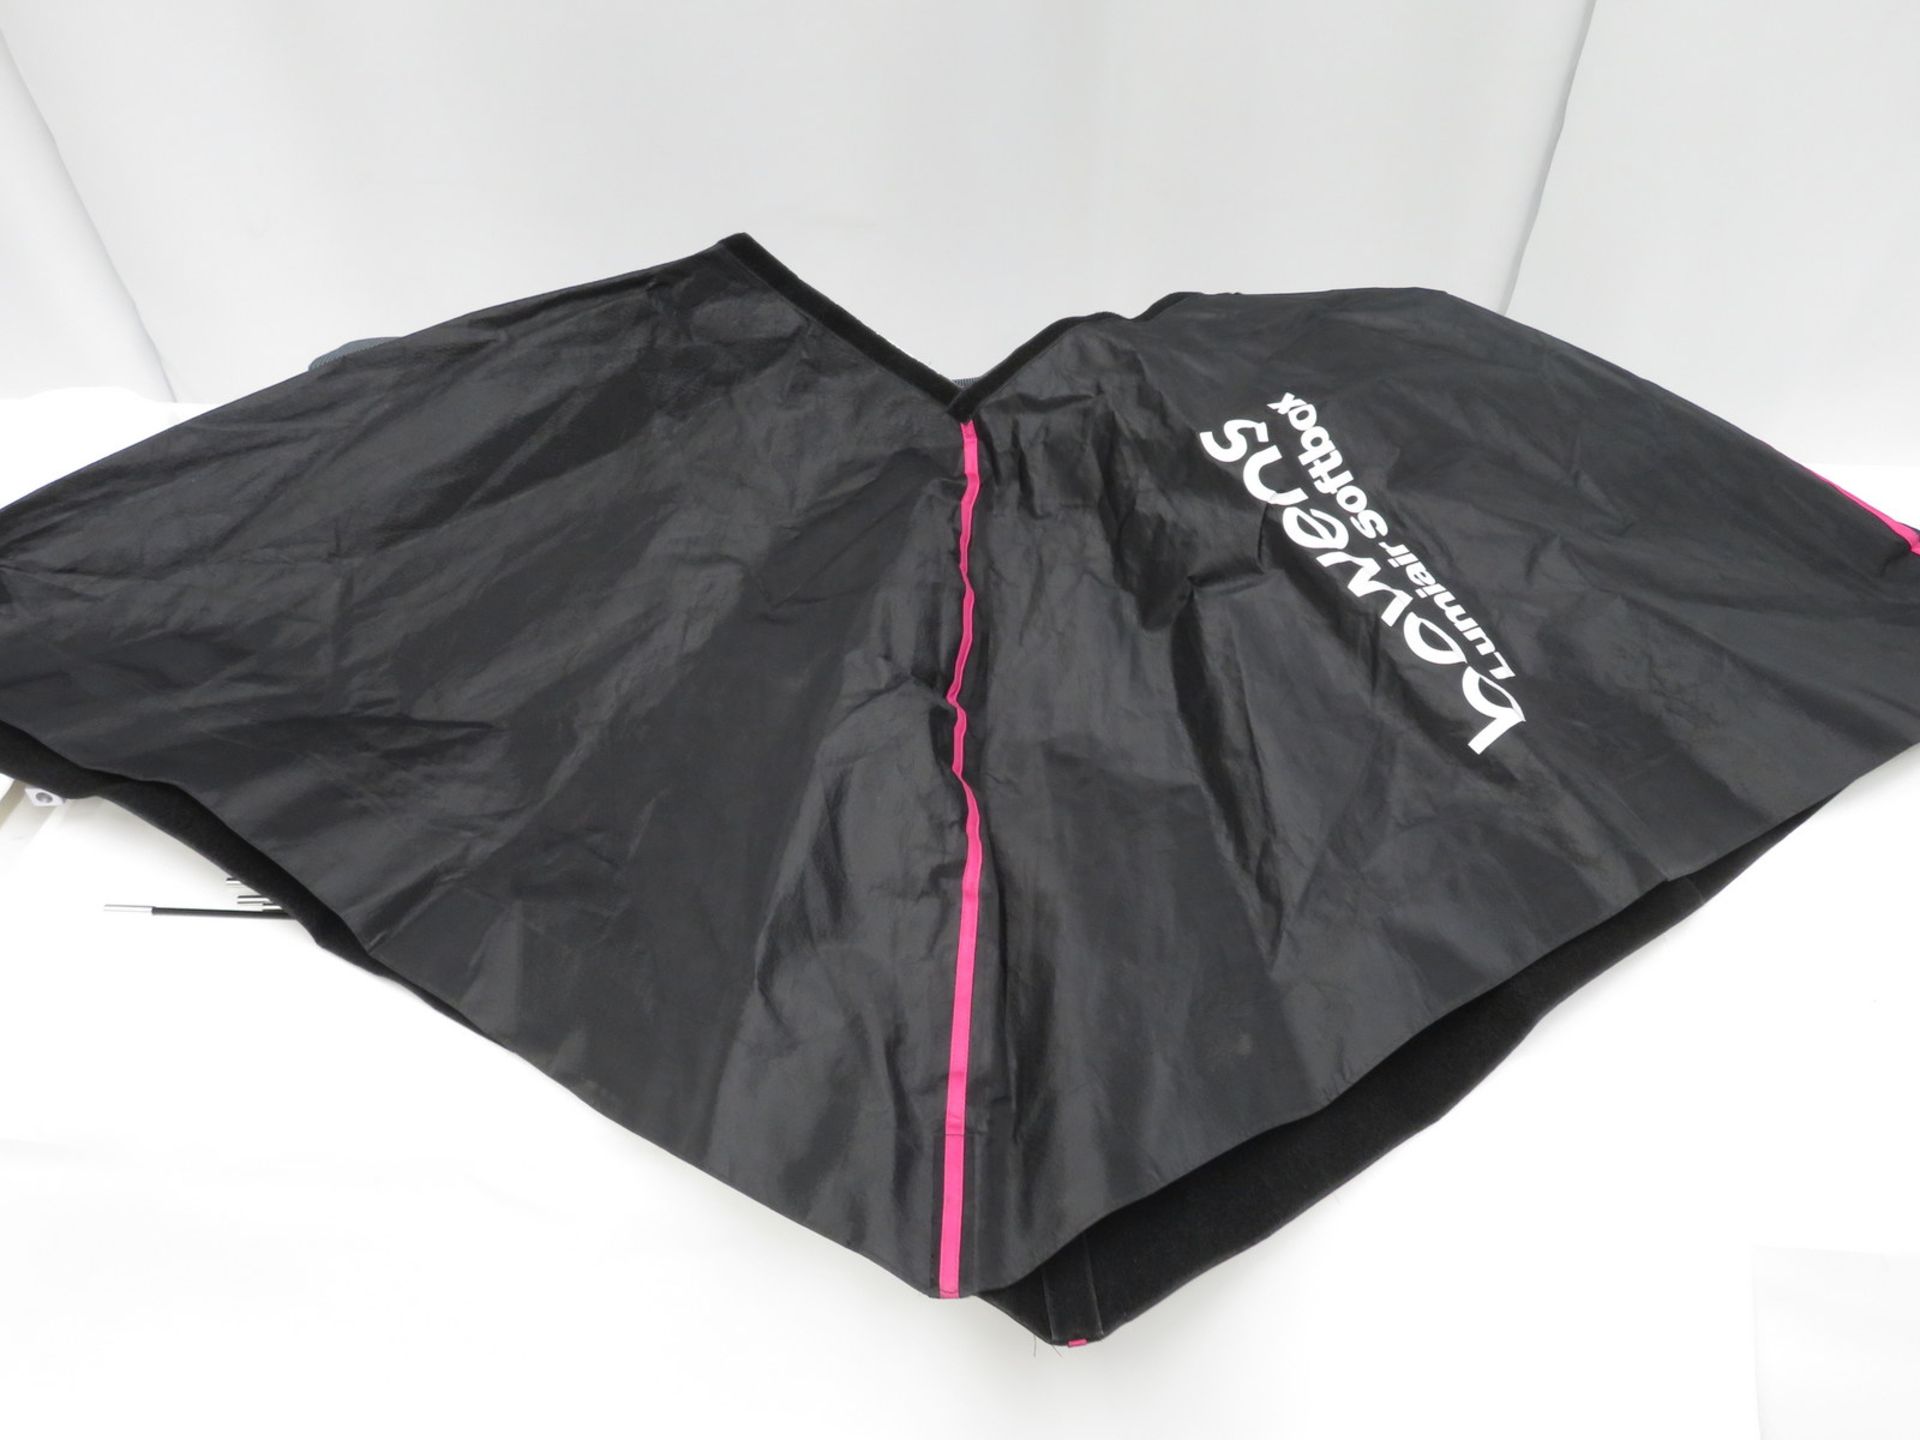 Bowens 1m x 1m softbox attachment for studio light in Elinchrom carry bag - Image 4 of 5